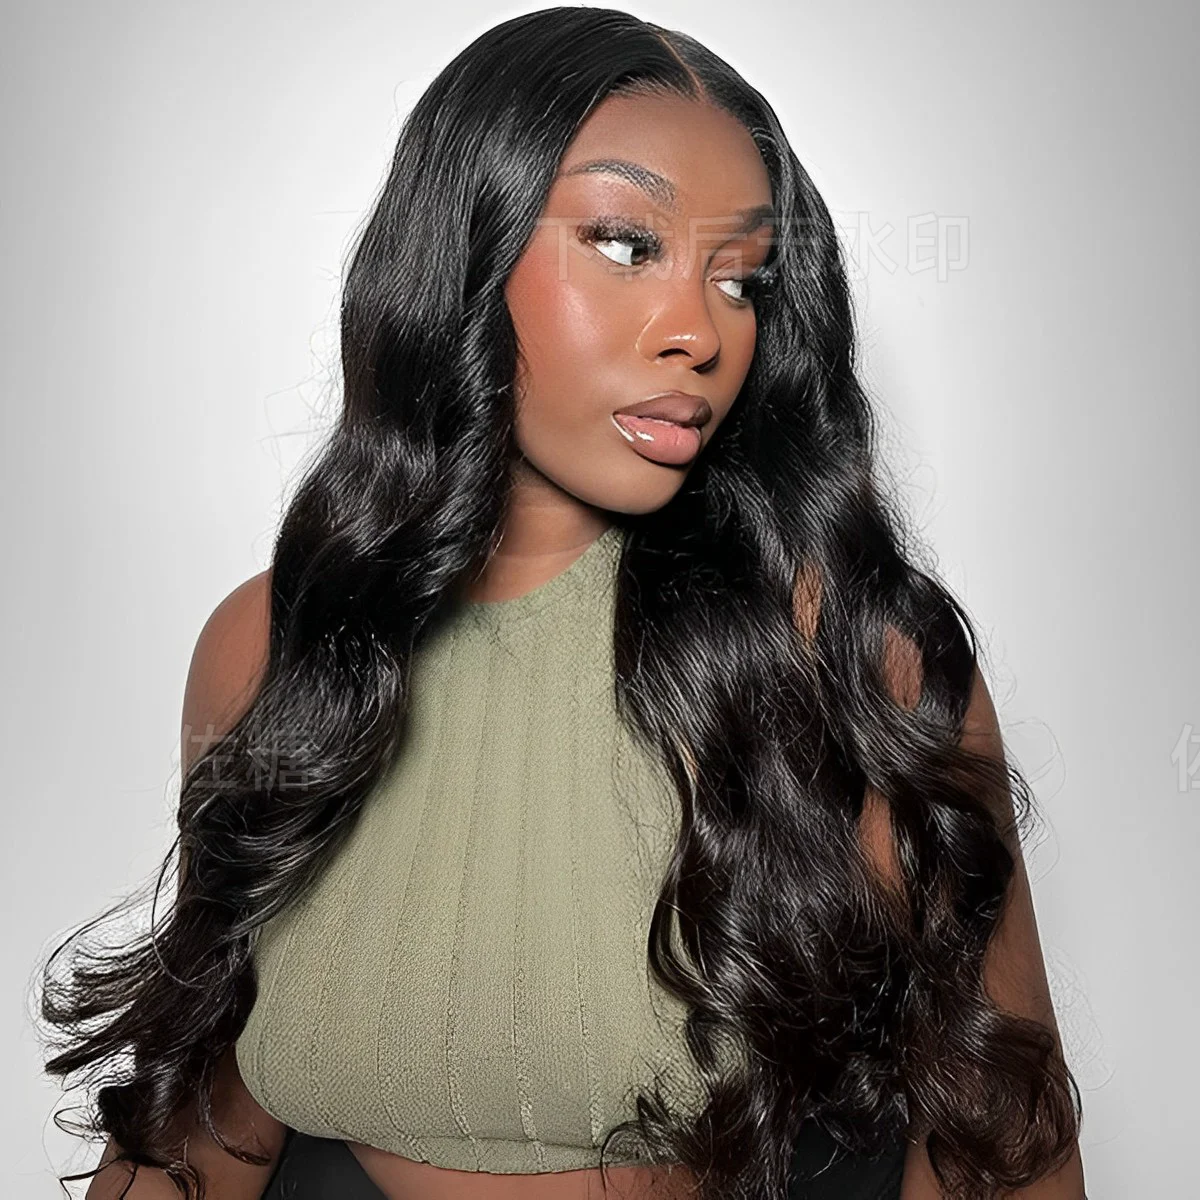 

4x6 5x5 Wear and Go Pre Cut HD Lace Front Wigs Pre Plucked Glueless Brazilian Virgin Lace Closure Wig Body Wave Human Hair Wig